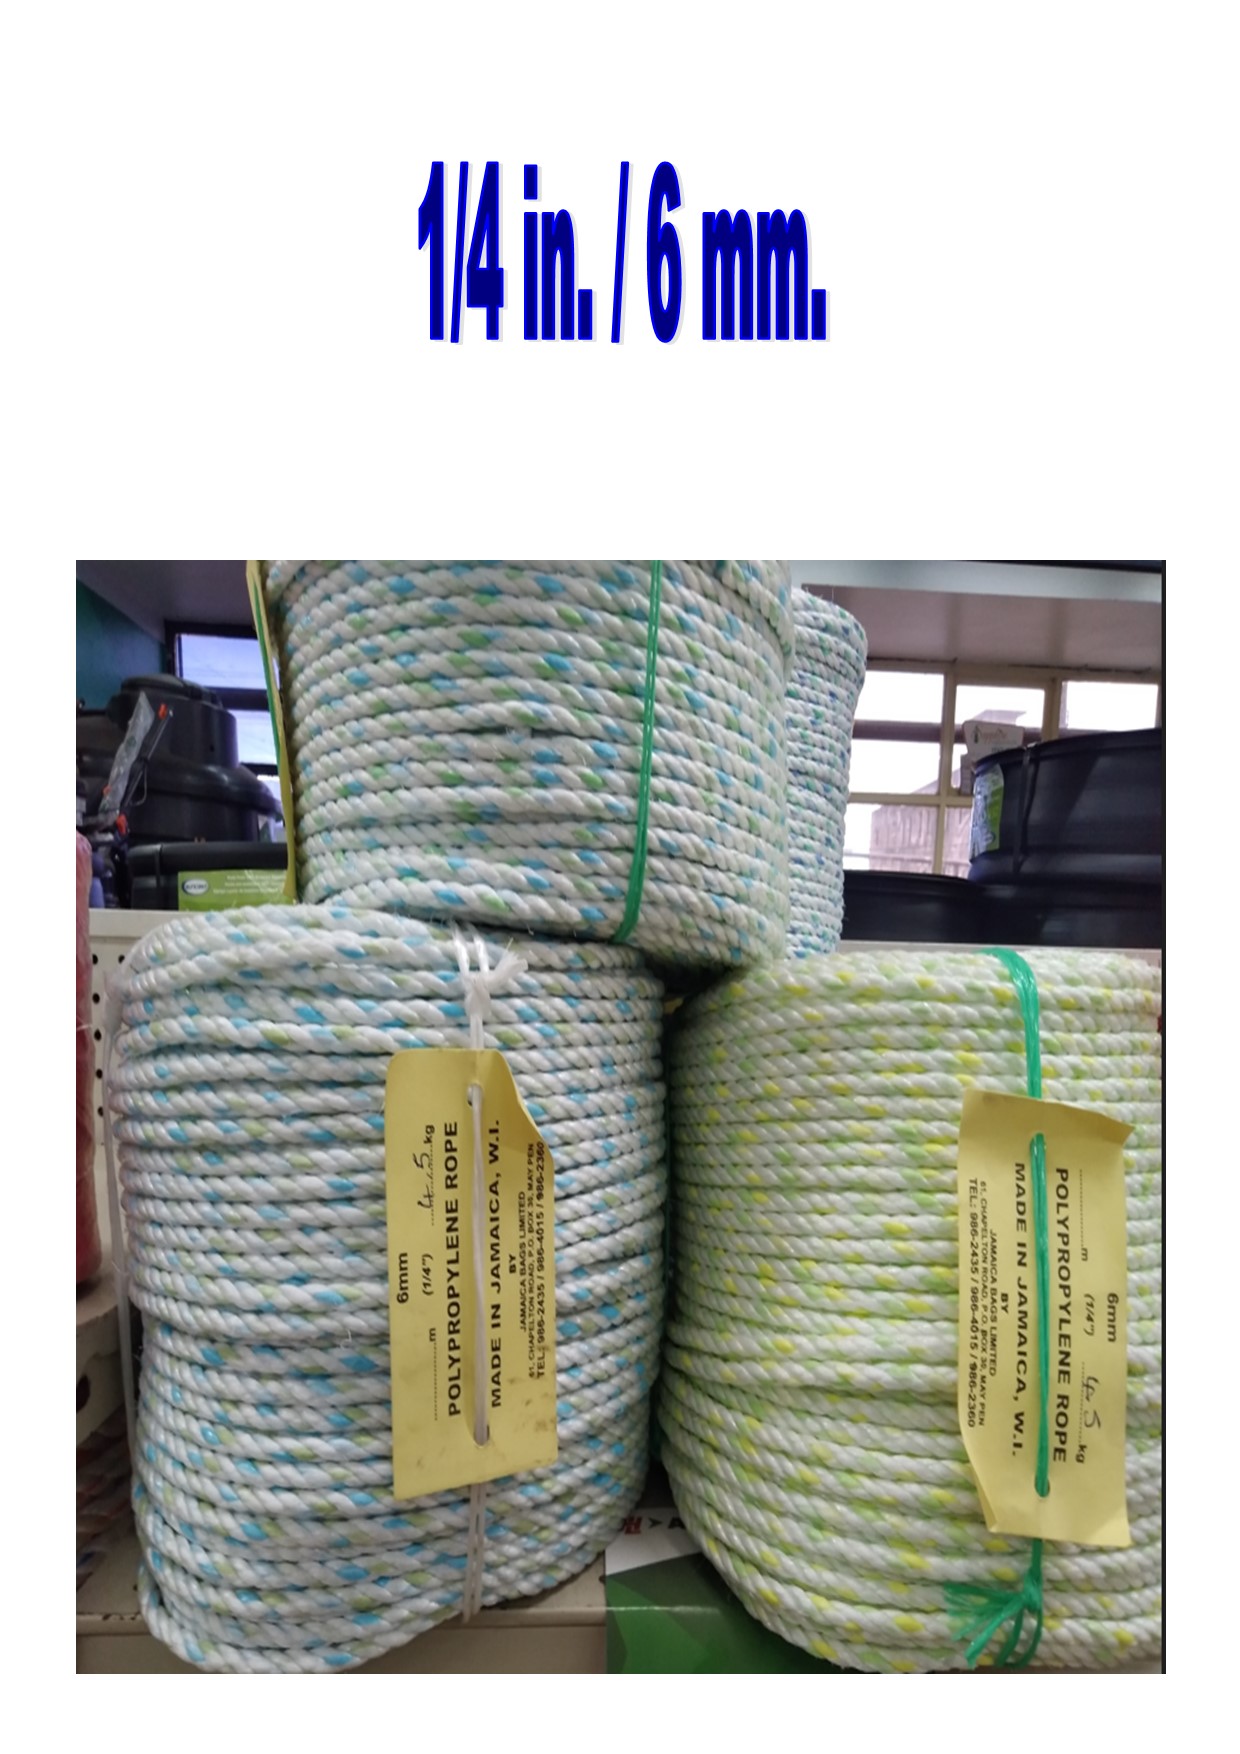 Mix Colour 1/4 in. Twisted Polypropylene Rope Sold Per Kilogram